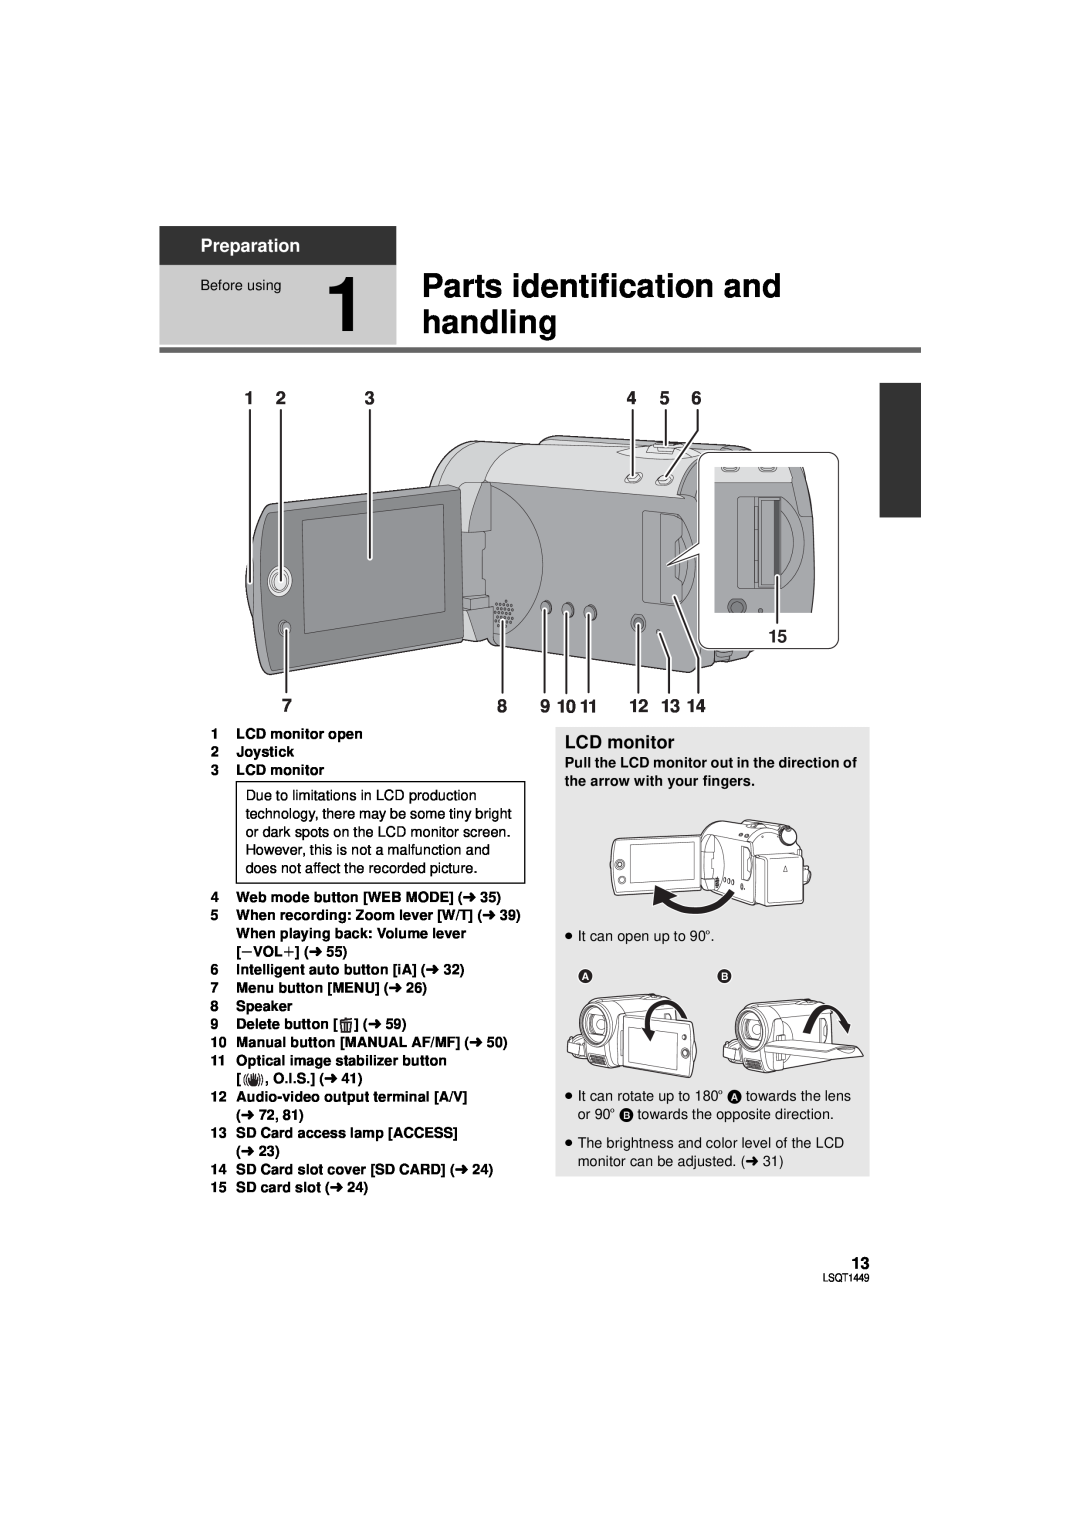 Panasonic SDR-H90PC, SDR-H80PC operating instructions Parts identification and, handling, Preparation, 9 10, LCD monitor 